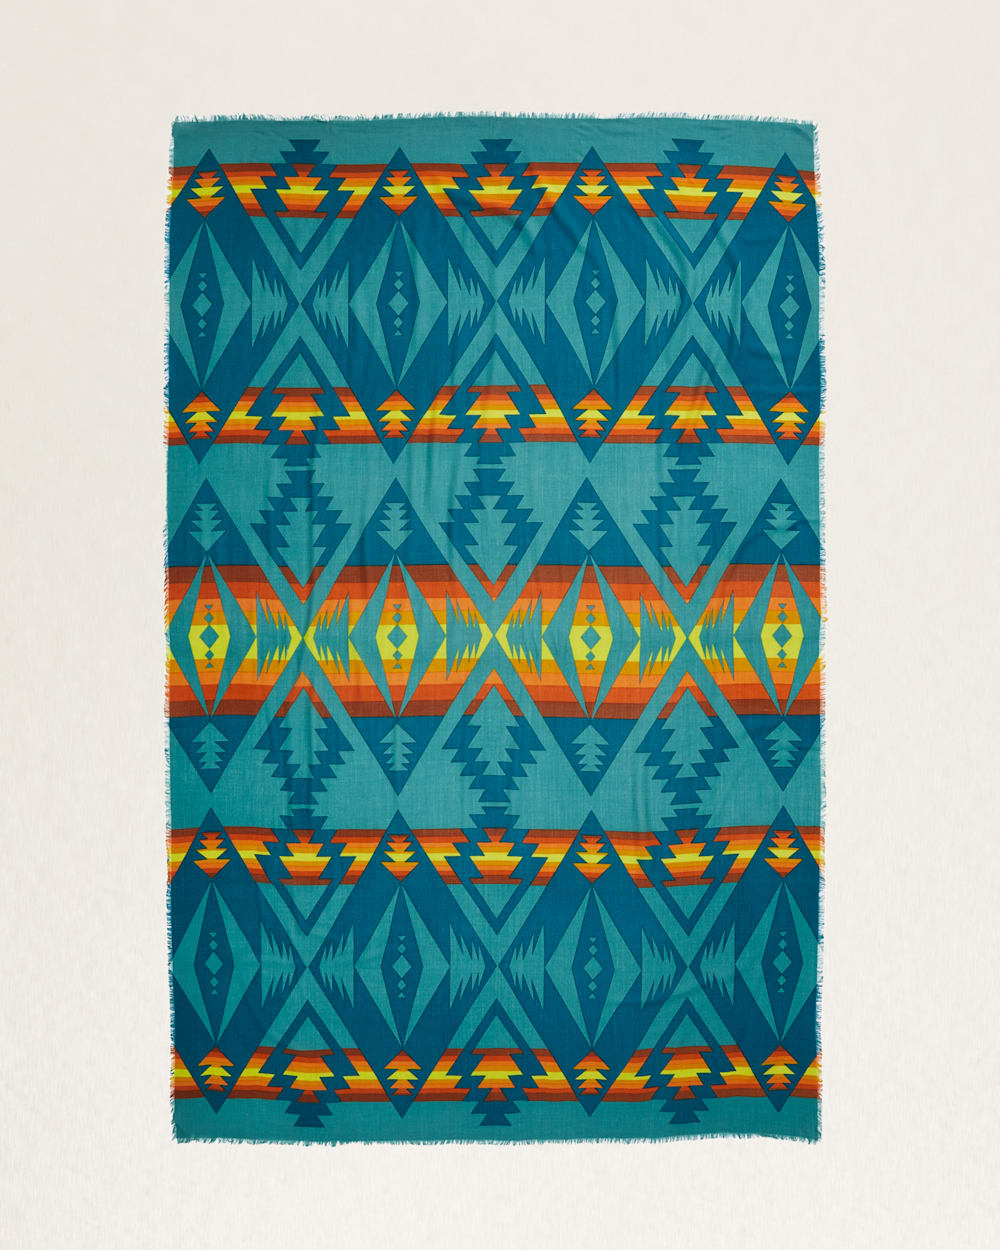 ALTERNATE VIEW OF PASCO BRIGHT FEATHERWEIGHT WOOL SCARF IN TURQUOISE image number 2